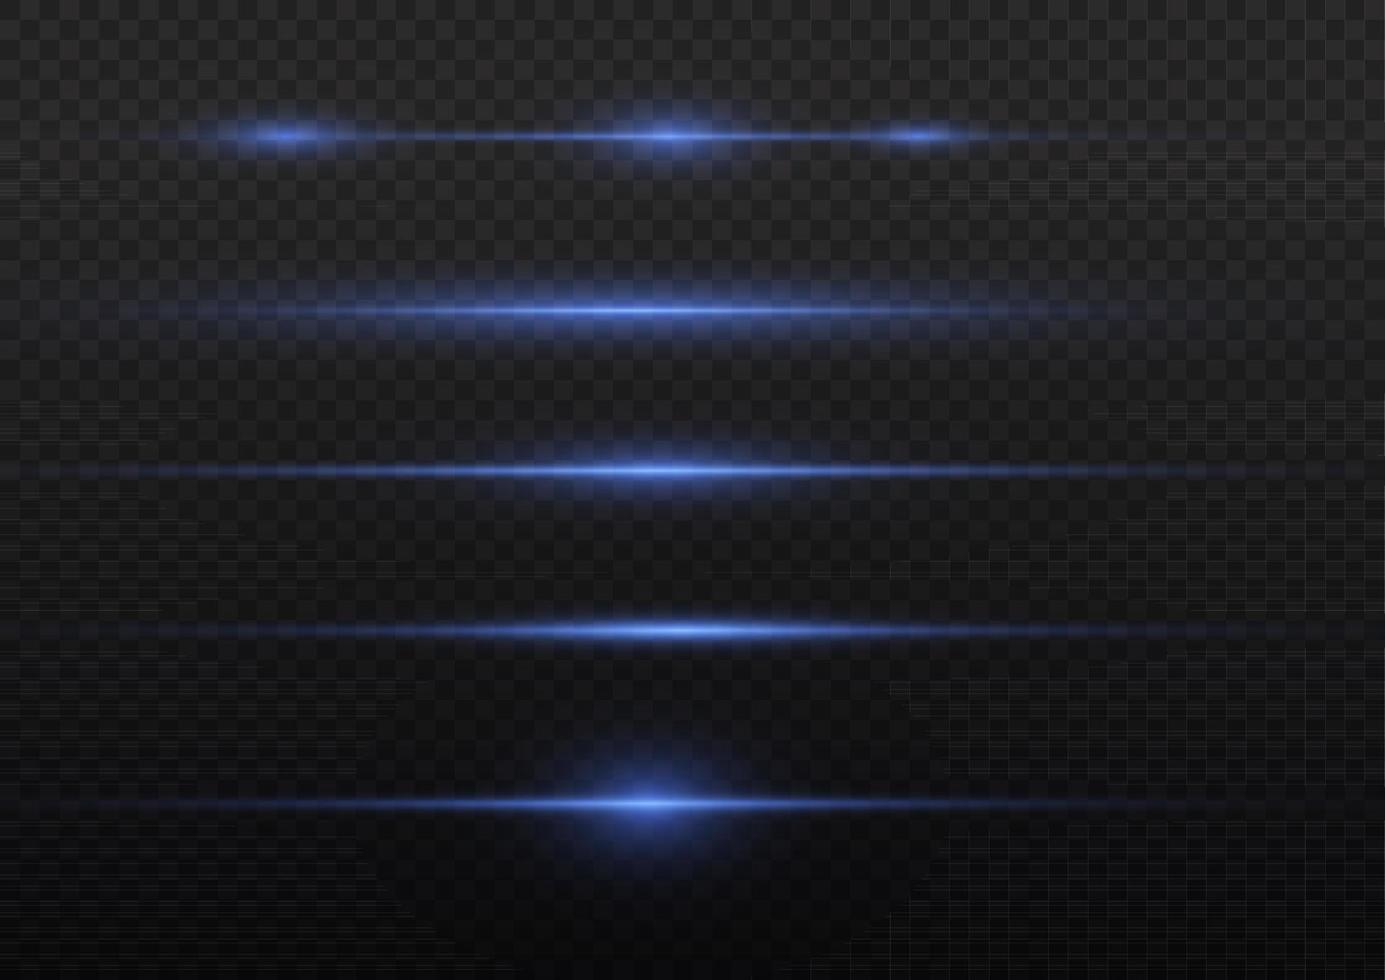 Horizontal beams of light. Beautiful light reflections. Glowing stripes on a light background. Glowing abstract sparkling background. Set of white horizontal highlights. Laser beams. spark and stars. vector